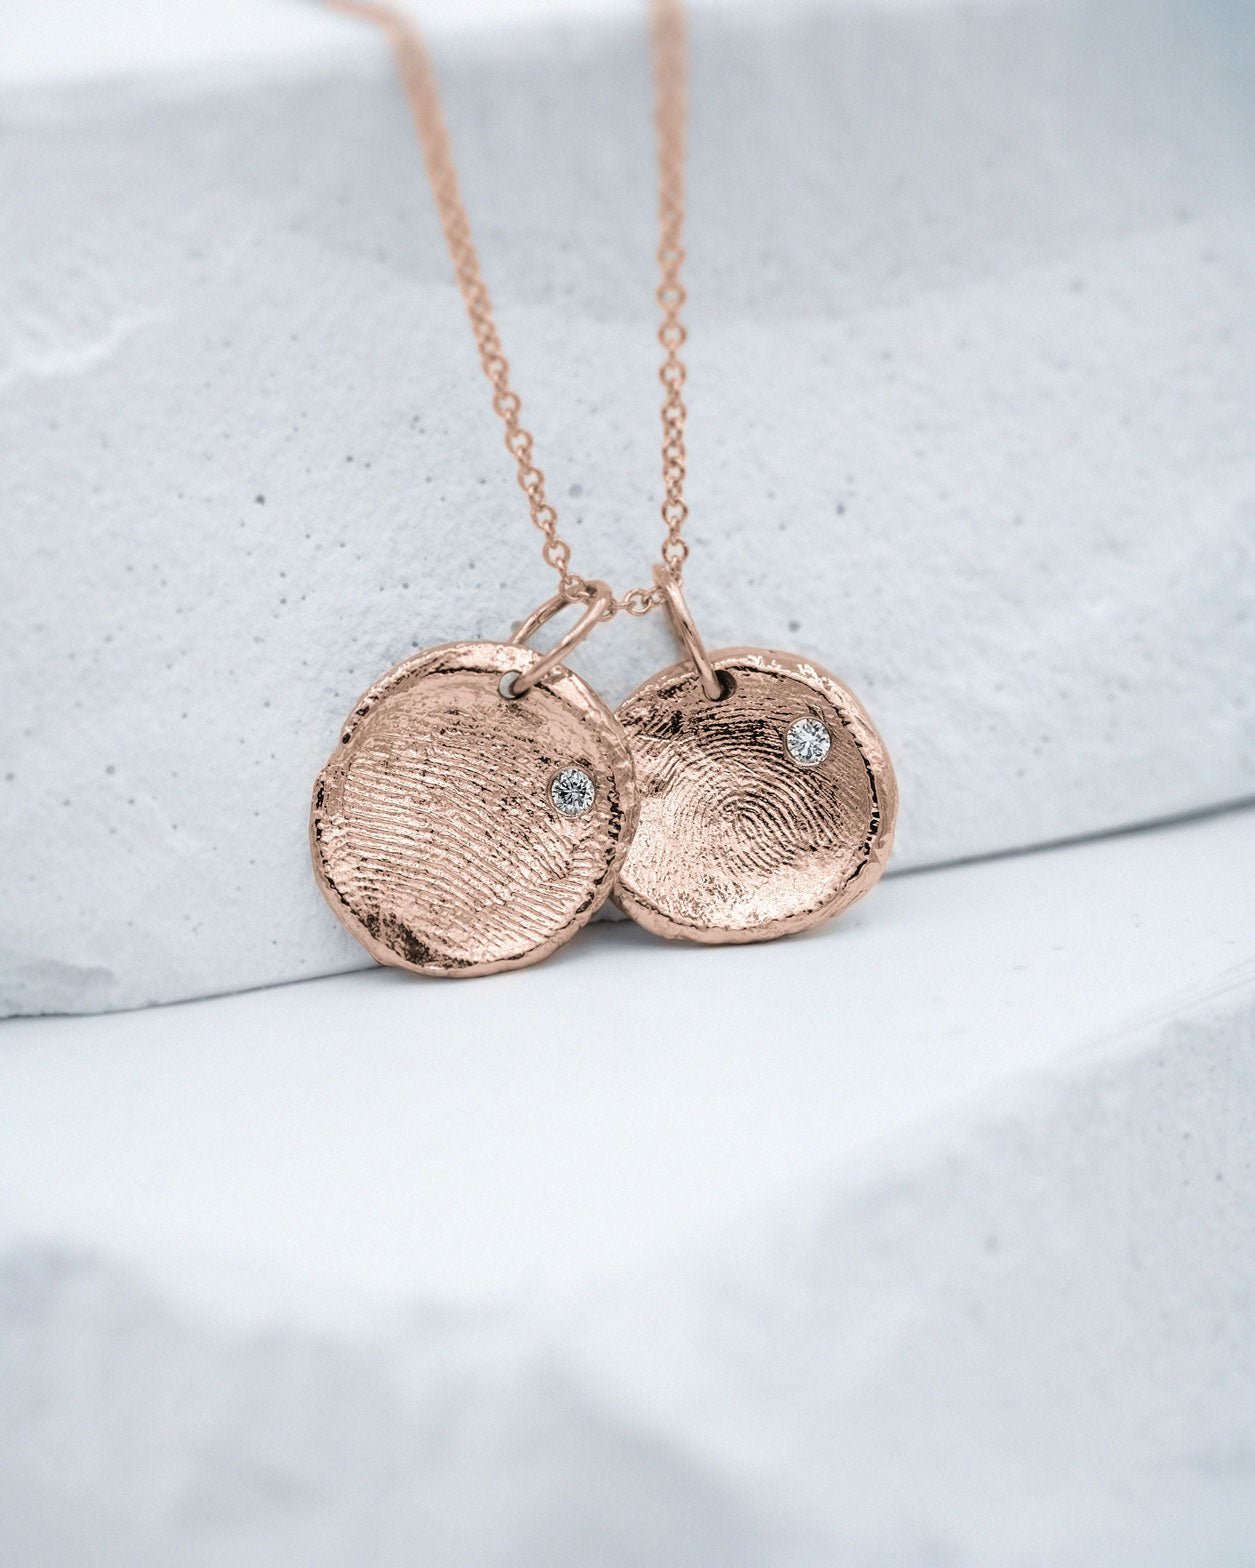 Mini Fingerprint Necklace in solid gold with a Diamond